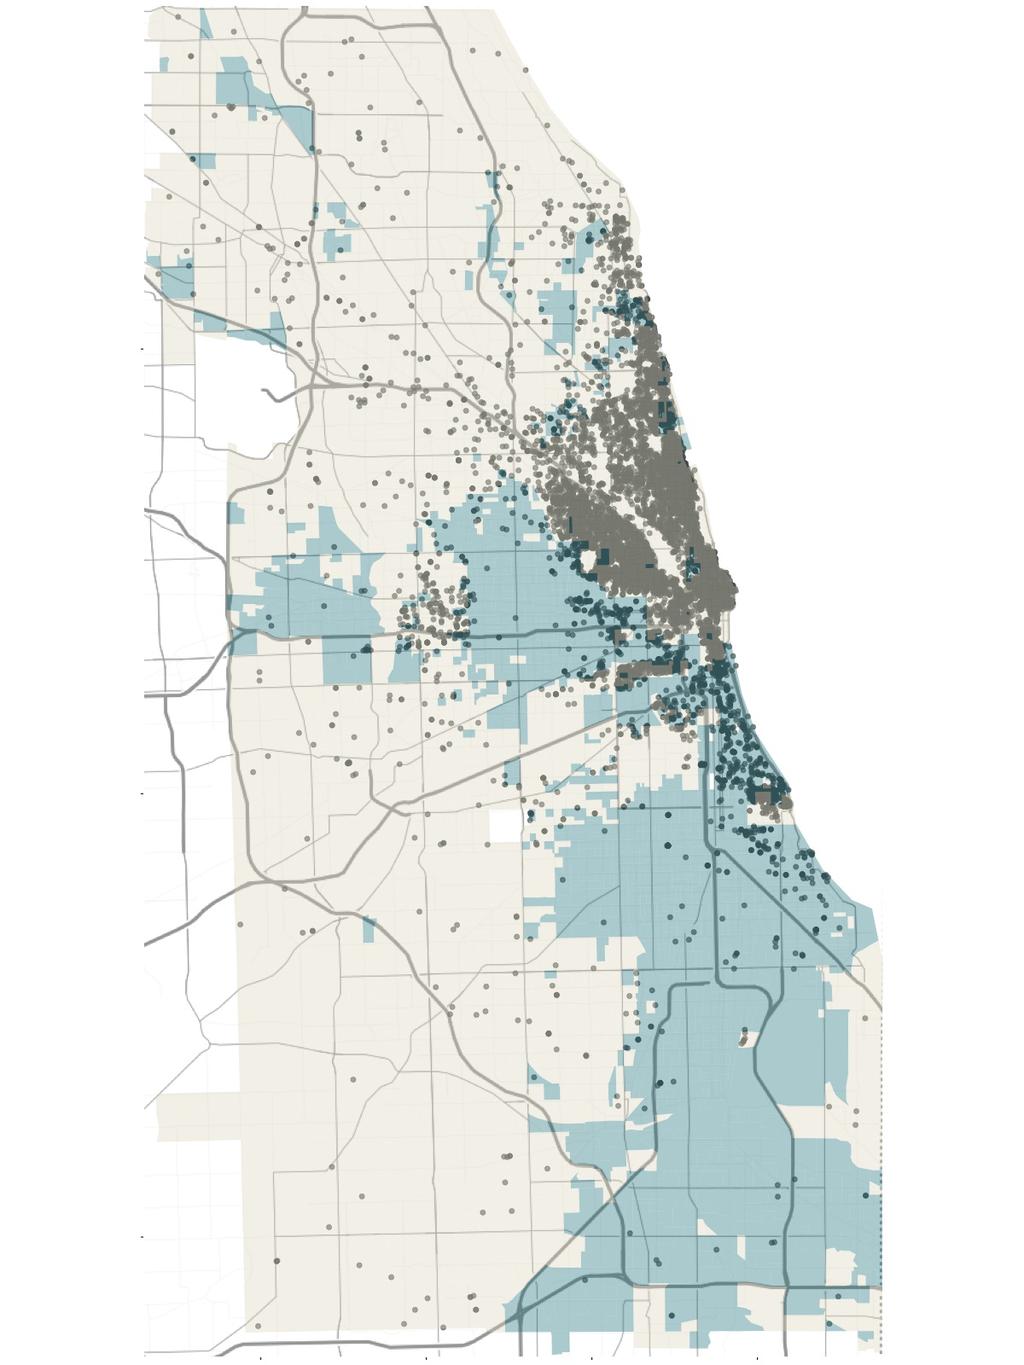 Cook County, Illinois Hosts and Guests in 67,000 1,300 106% Of